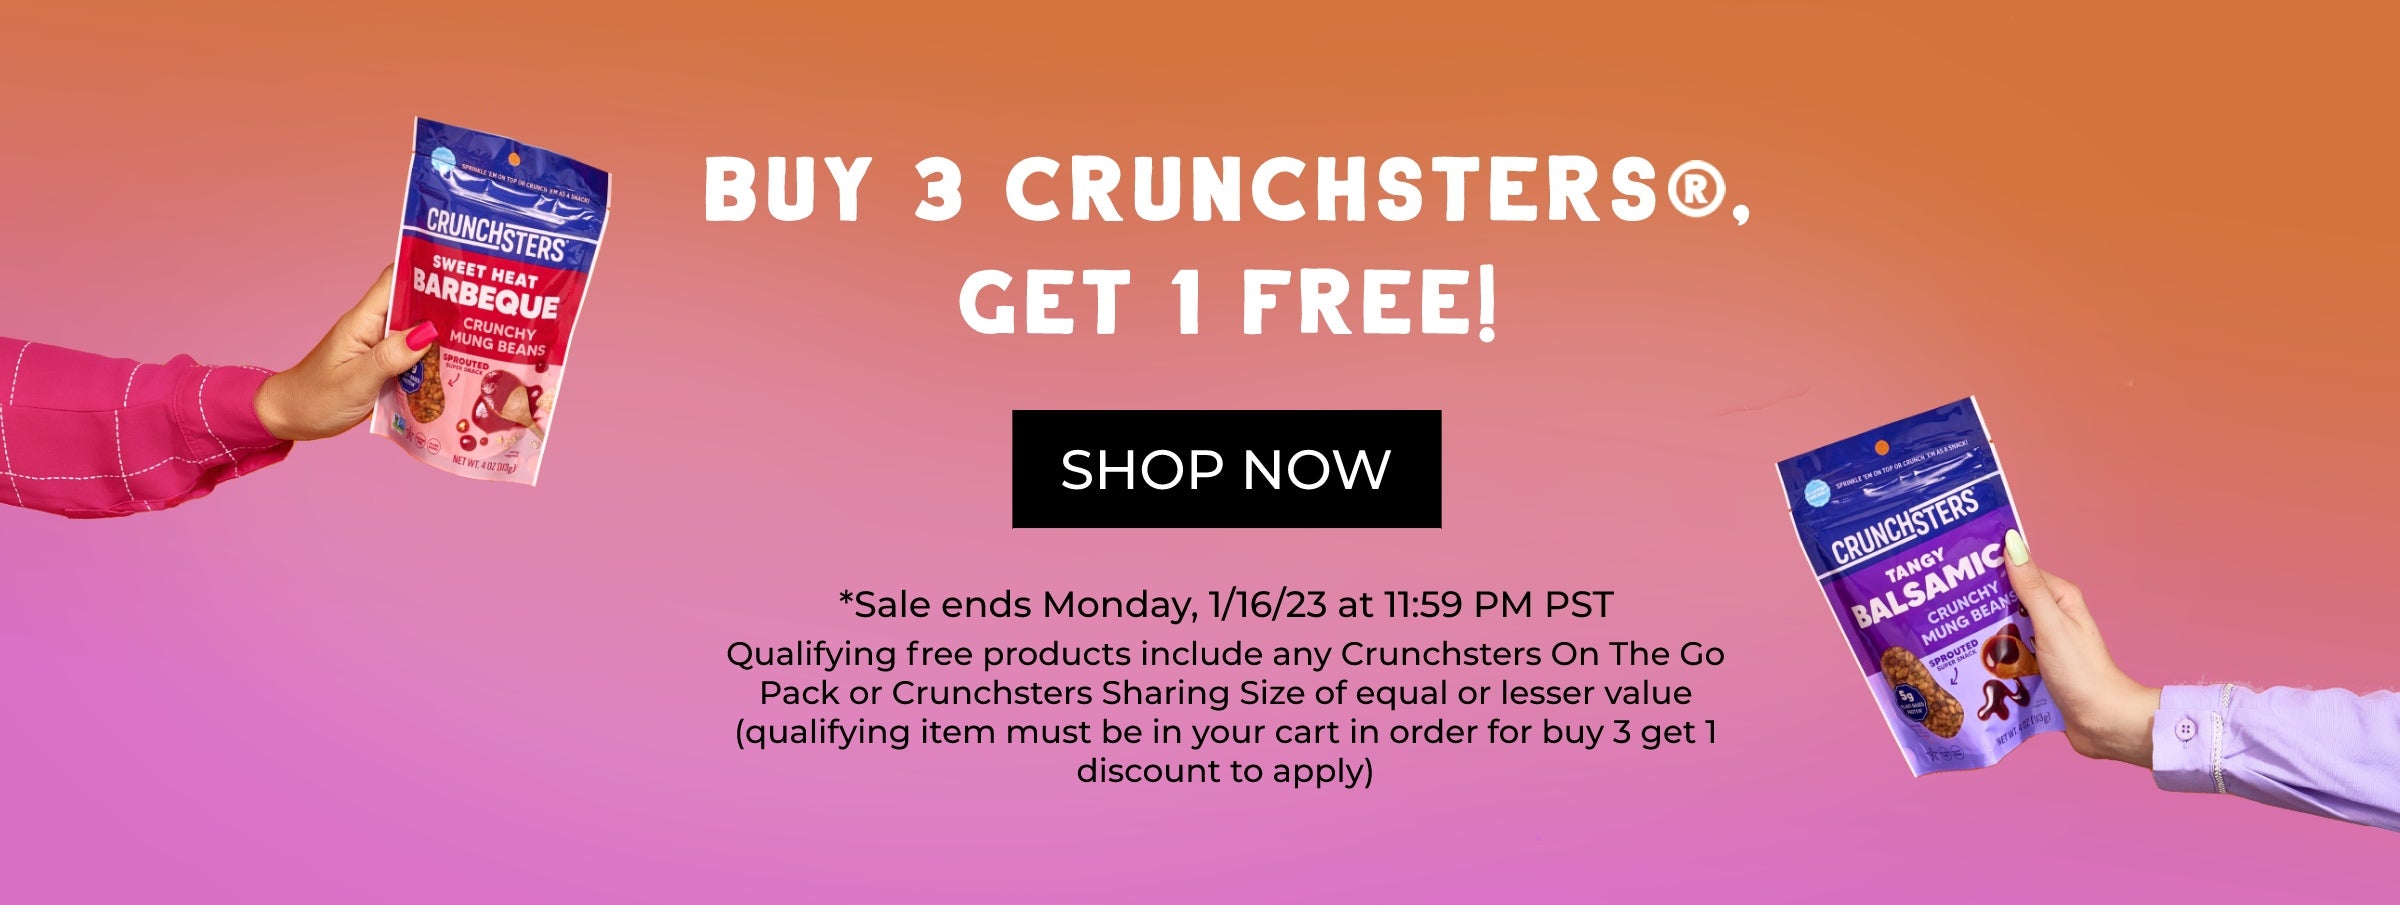 3 for 1 Crunchsters Sale